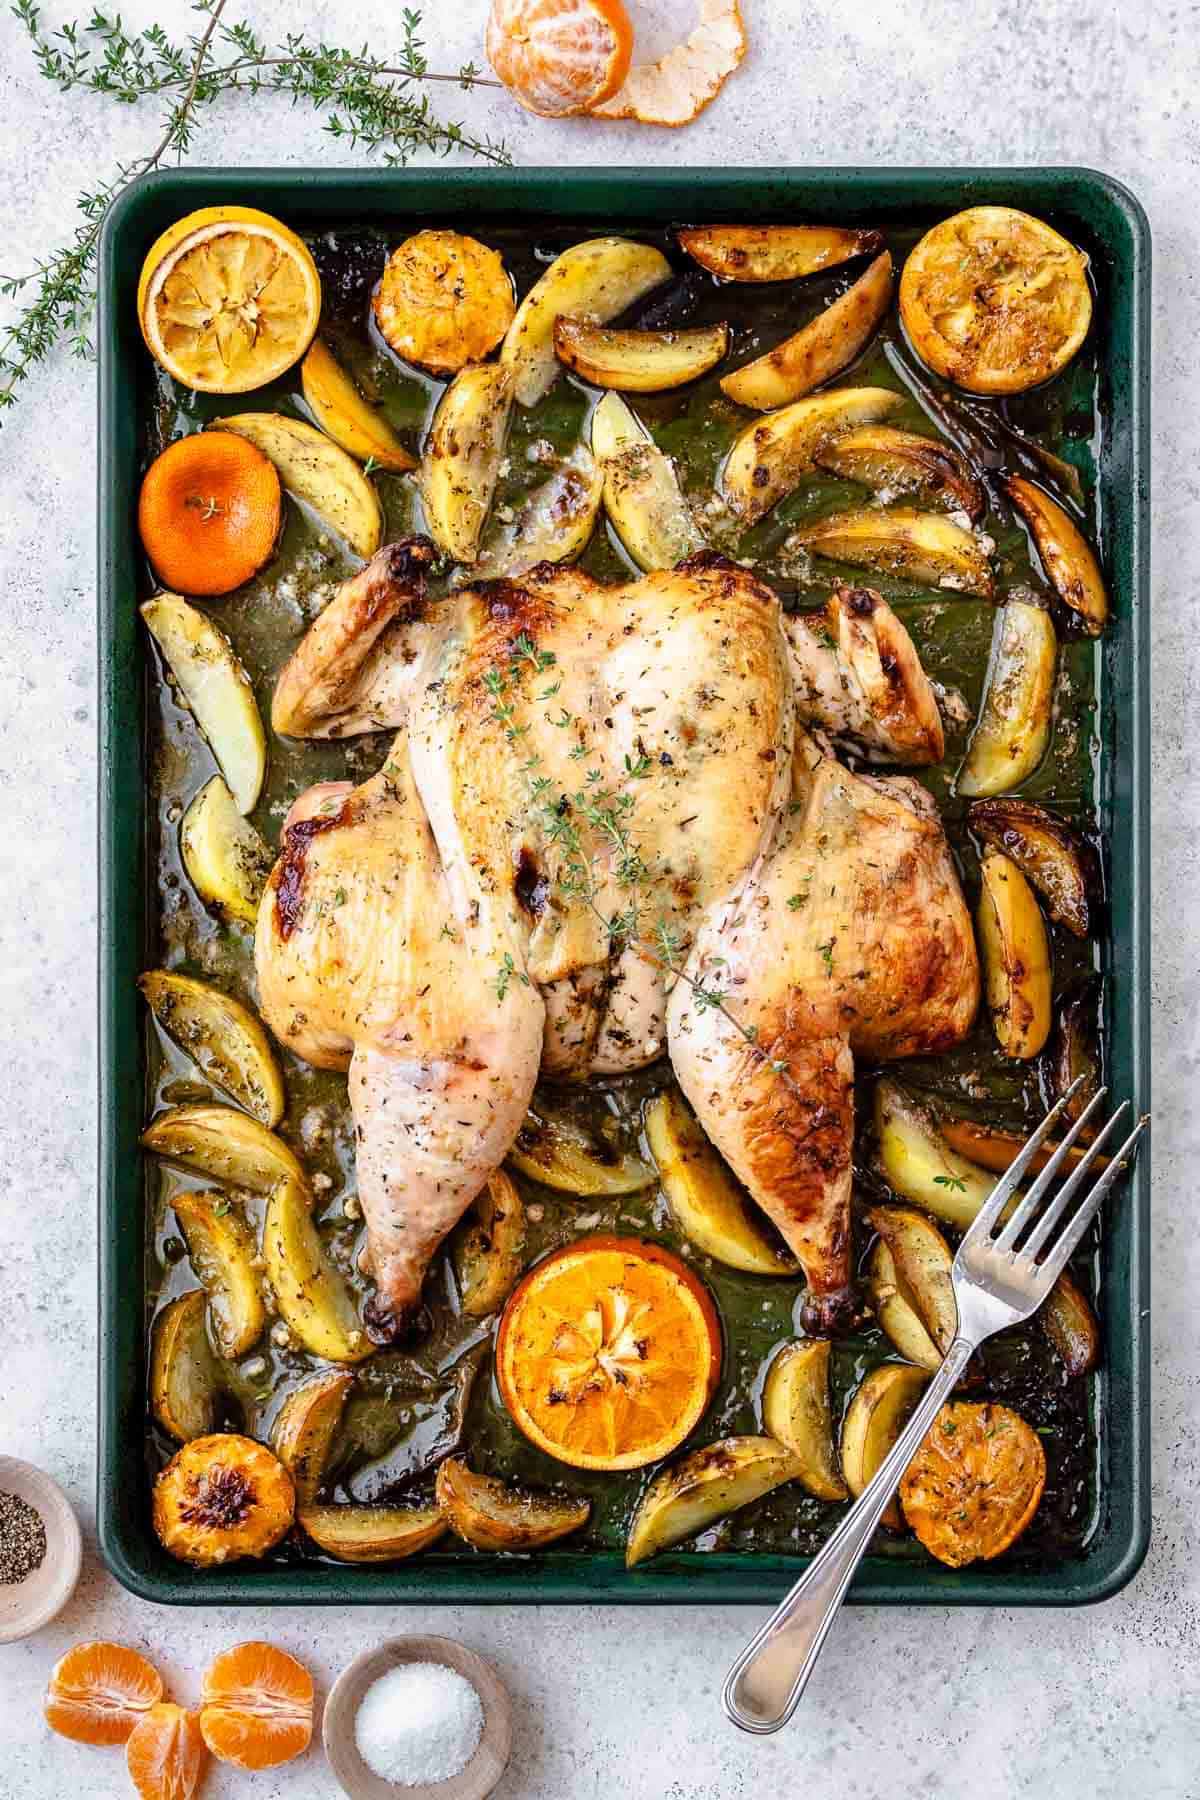 roast spatchcock chicken on a bed of potato wedges and citrus pieces on a sheet pan with a fork surrounded by bowls of salt and pepper, sprigs of thyme and peeled clementine oranges.